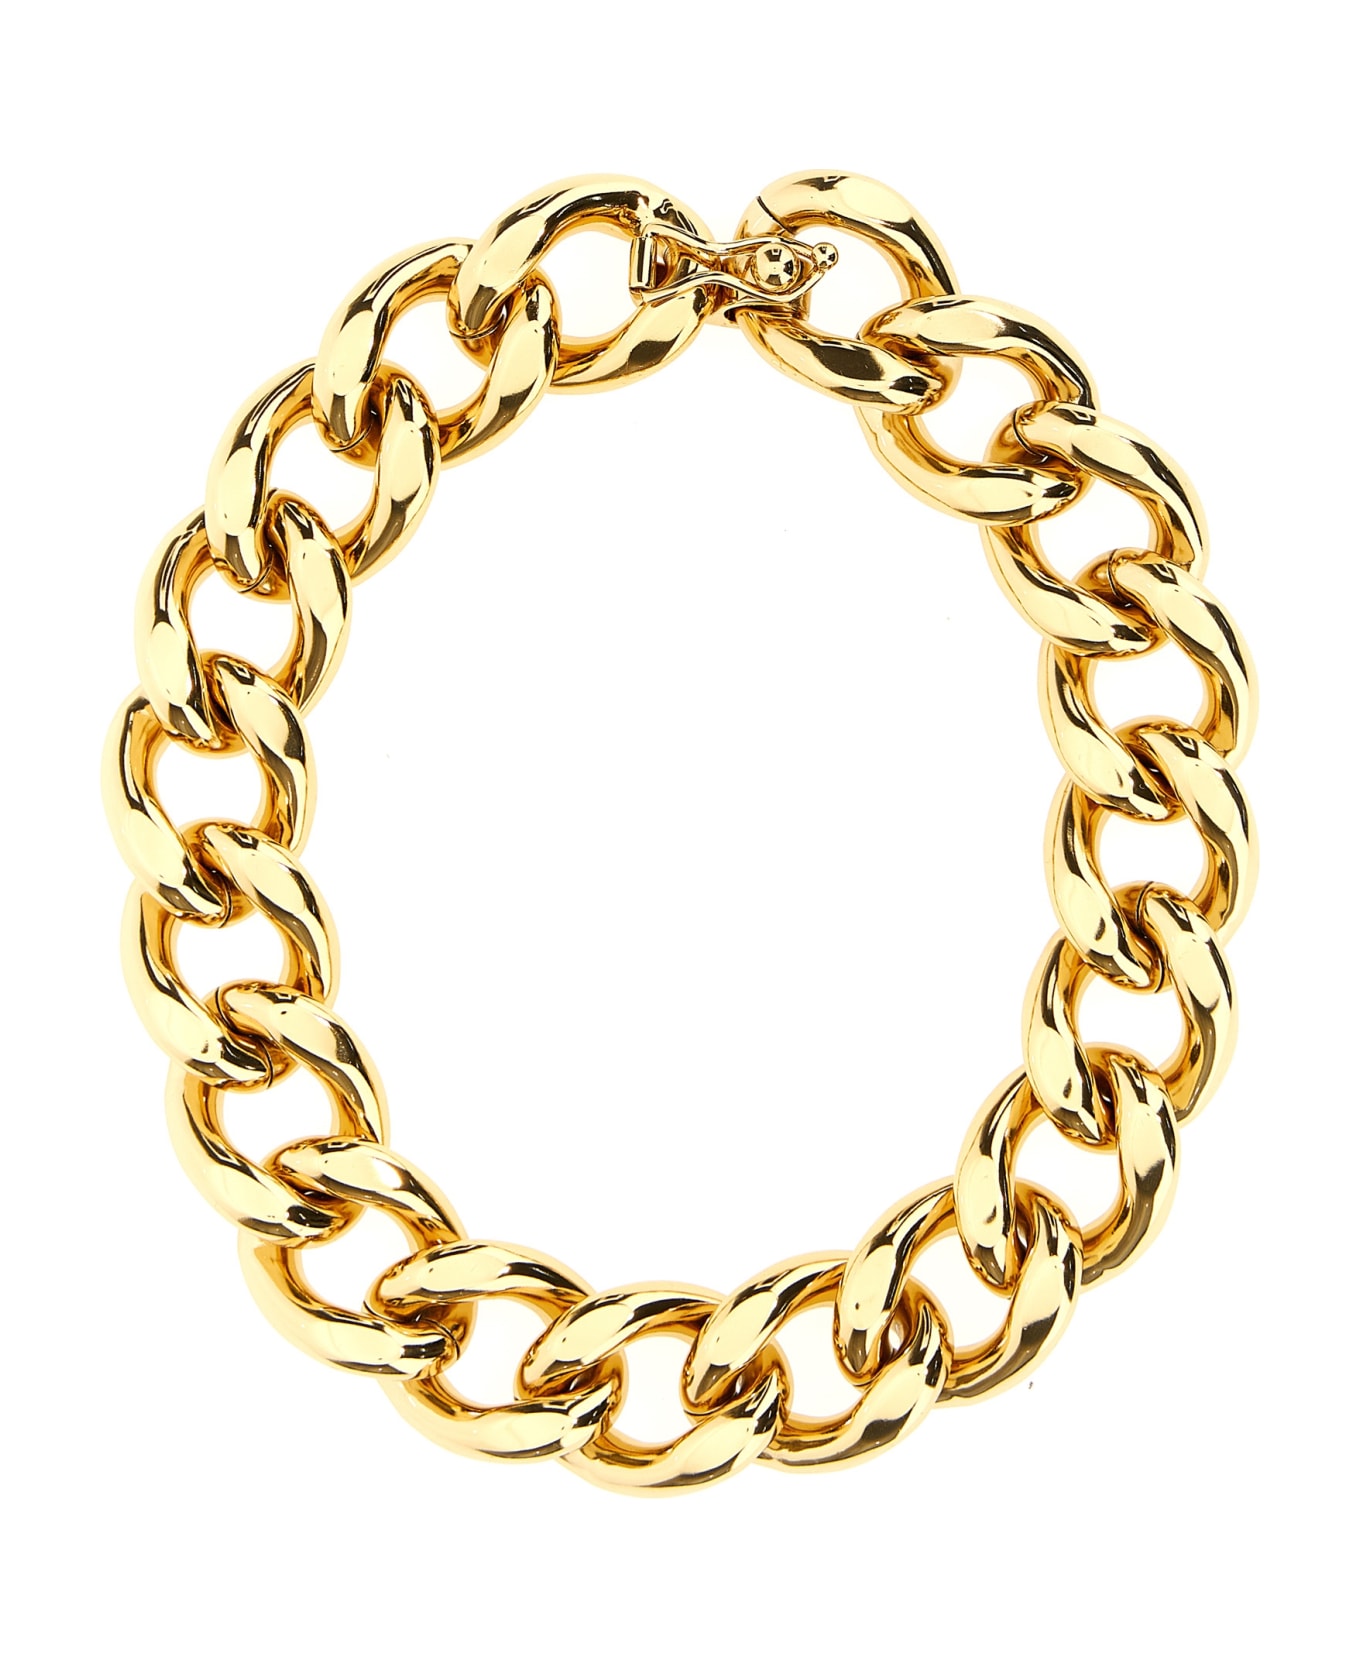 Isabel Marant 'dore' Necklace - Gold ネックレス